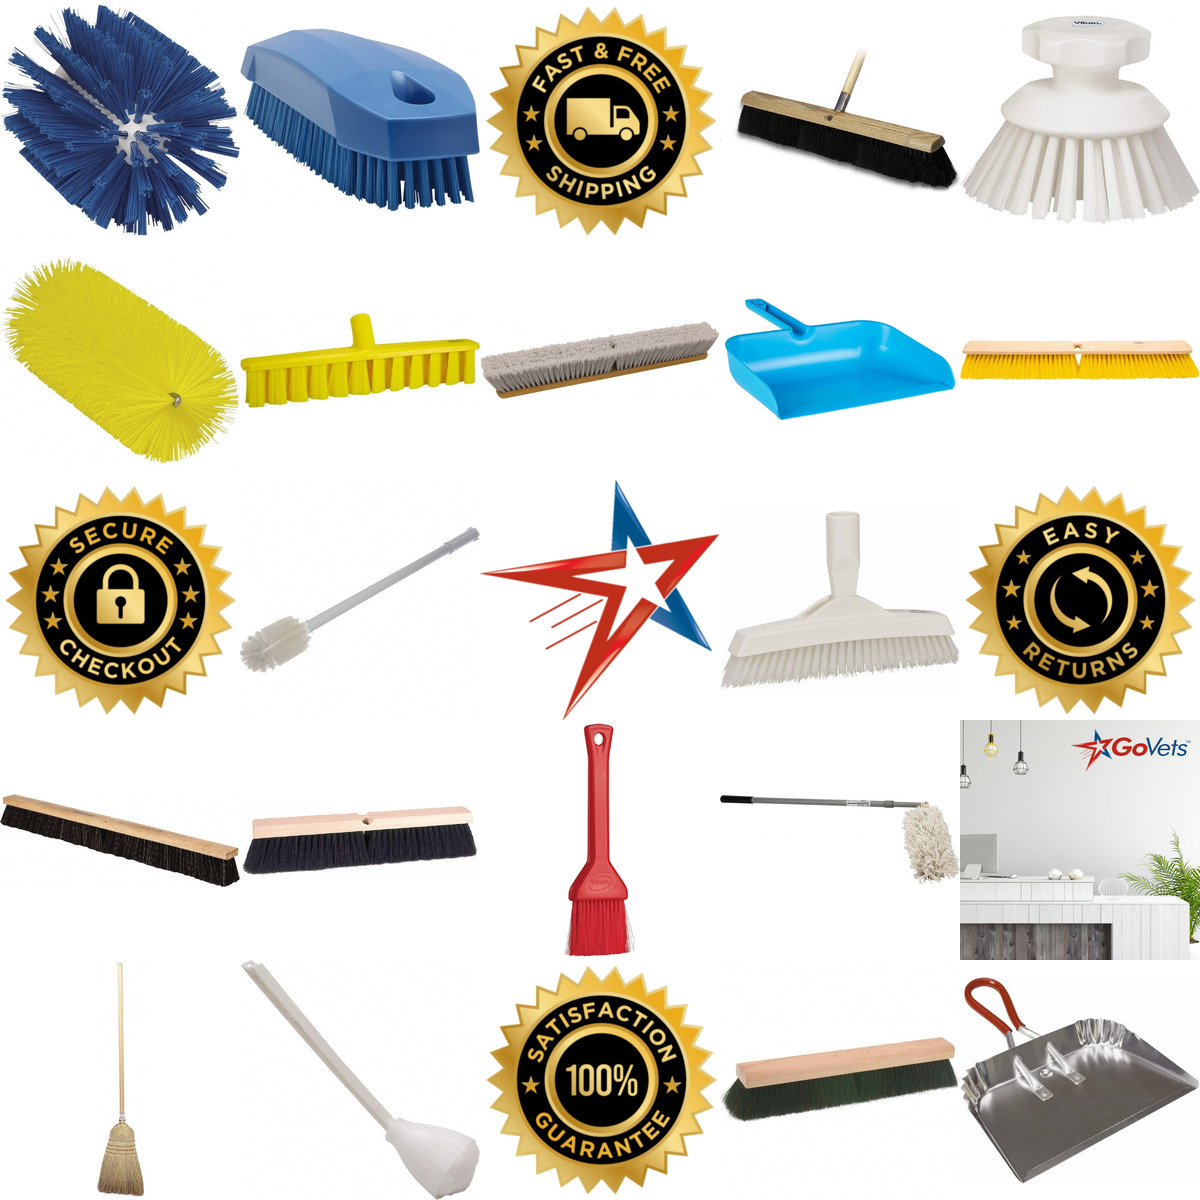 A selection of Brooms Brushes and Dusters products on GoVets